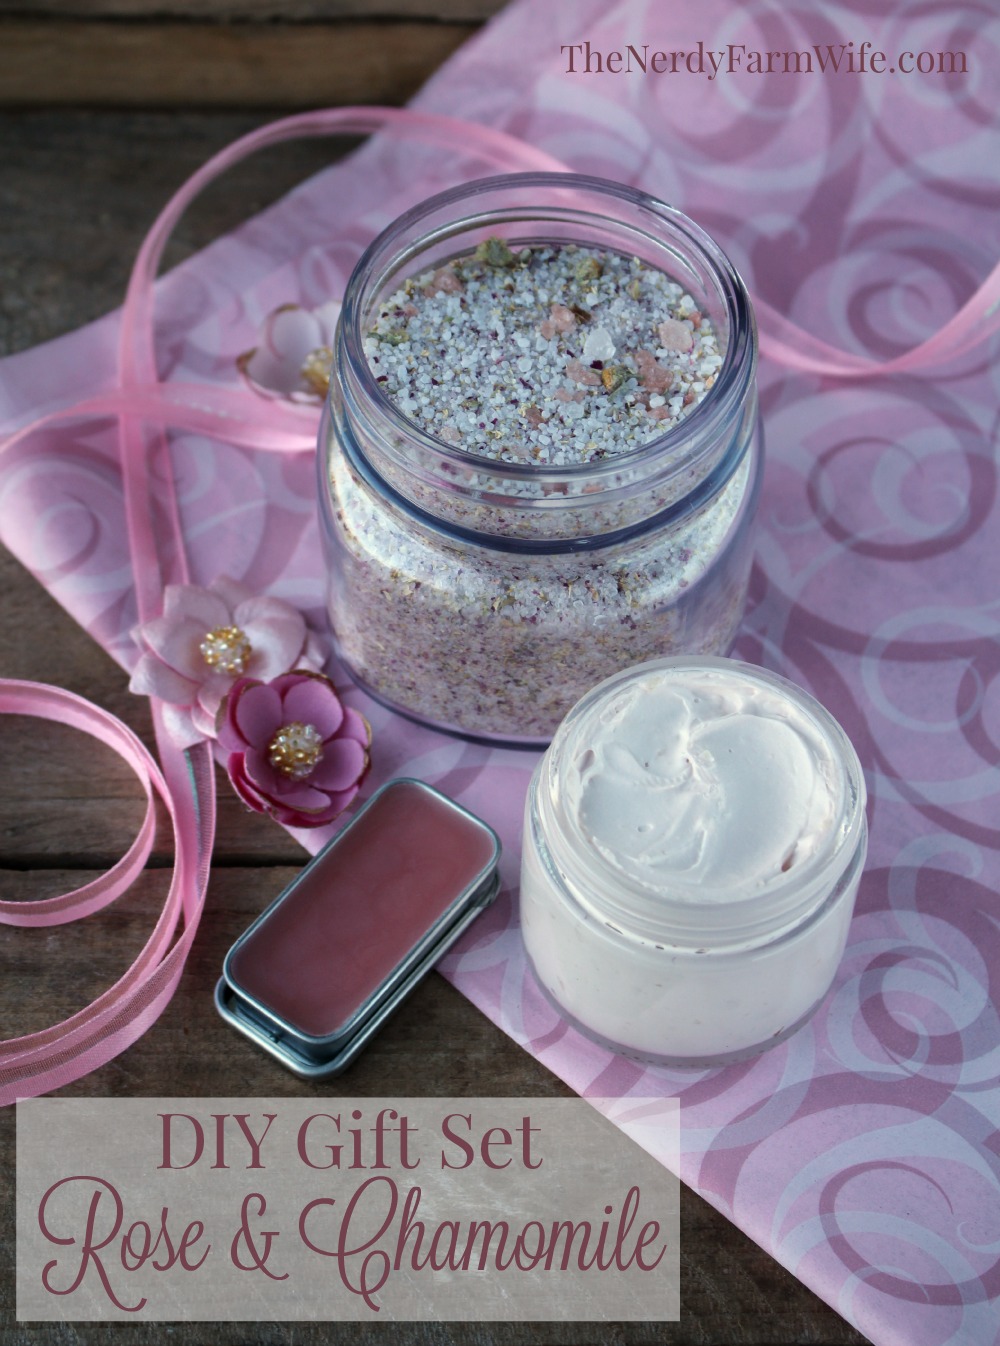 DIY Rose & Chamomile Gift Set - recipes for bath salts, lip balm and whipped hand cream